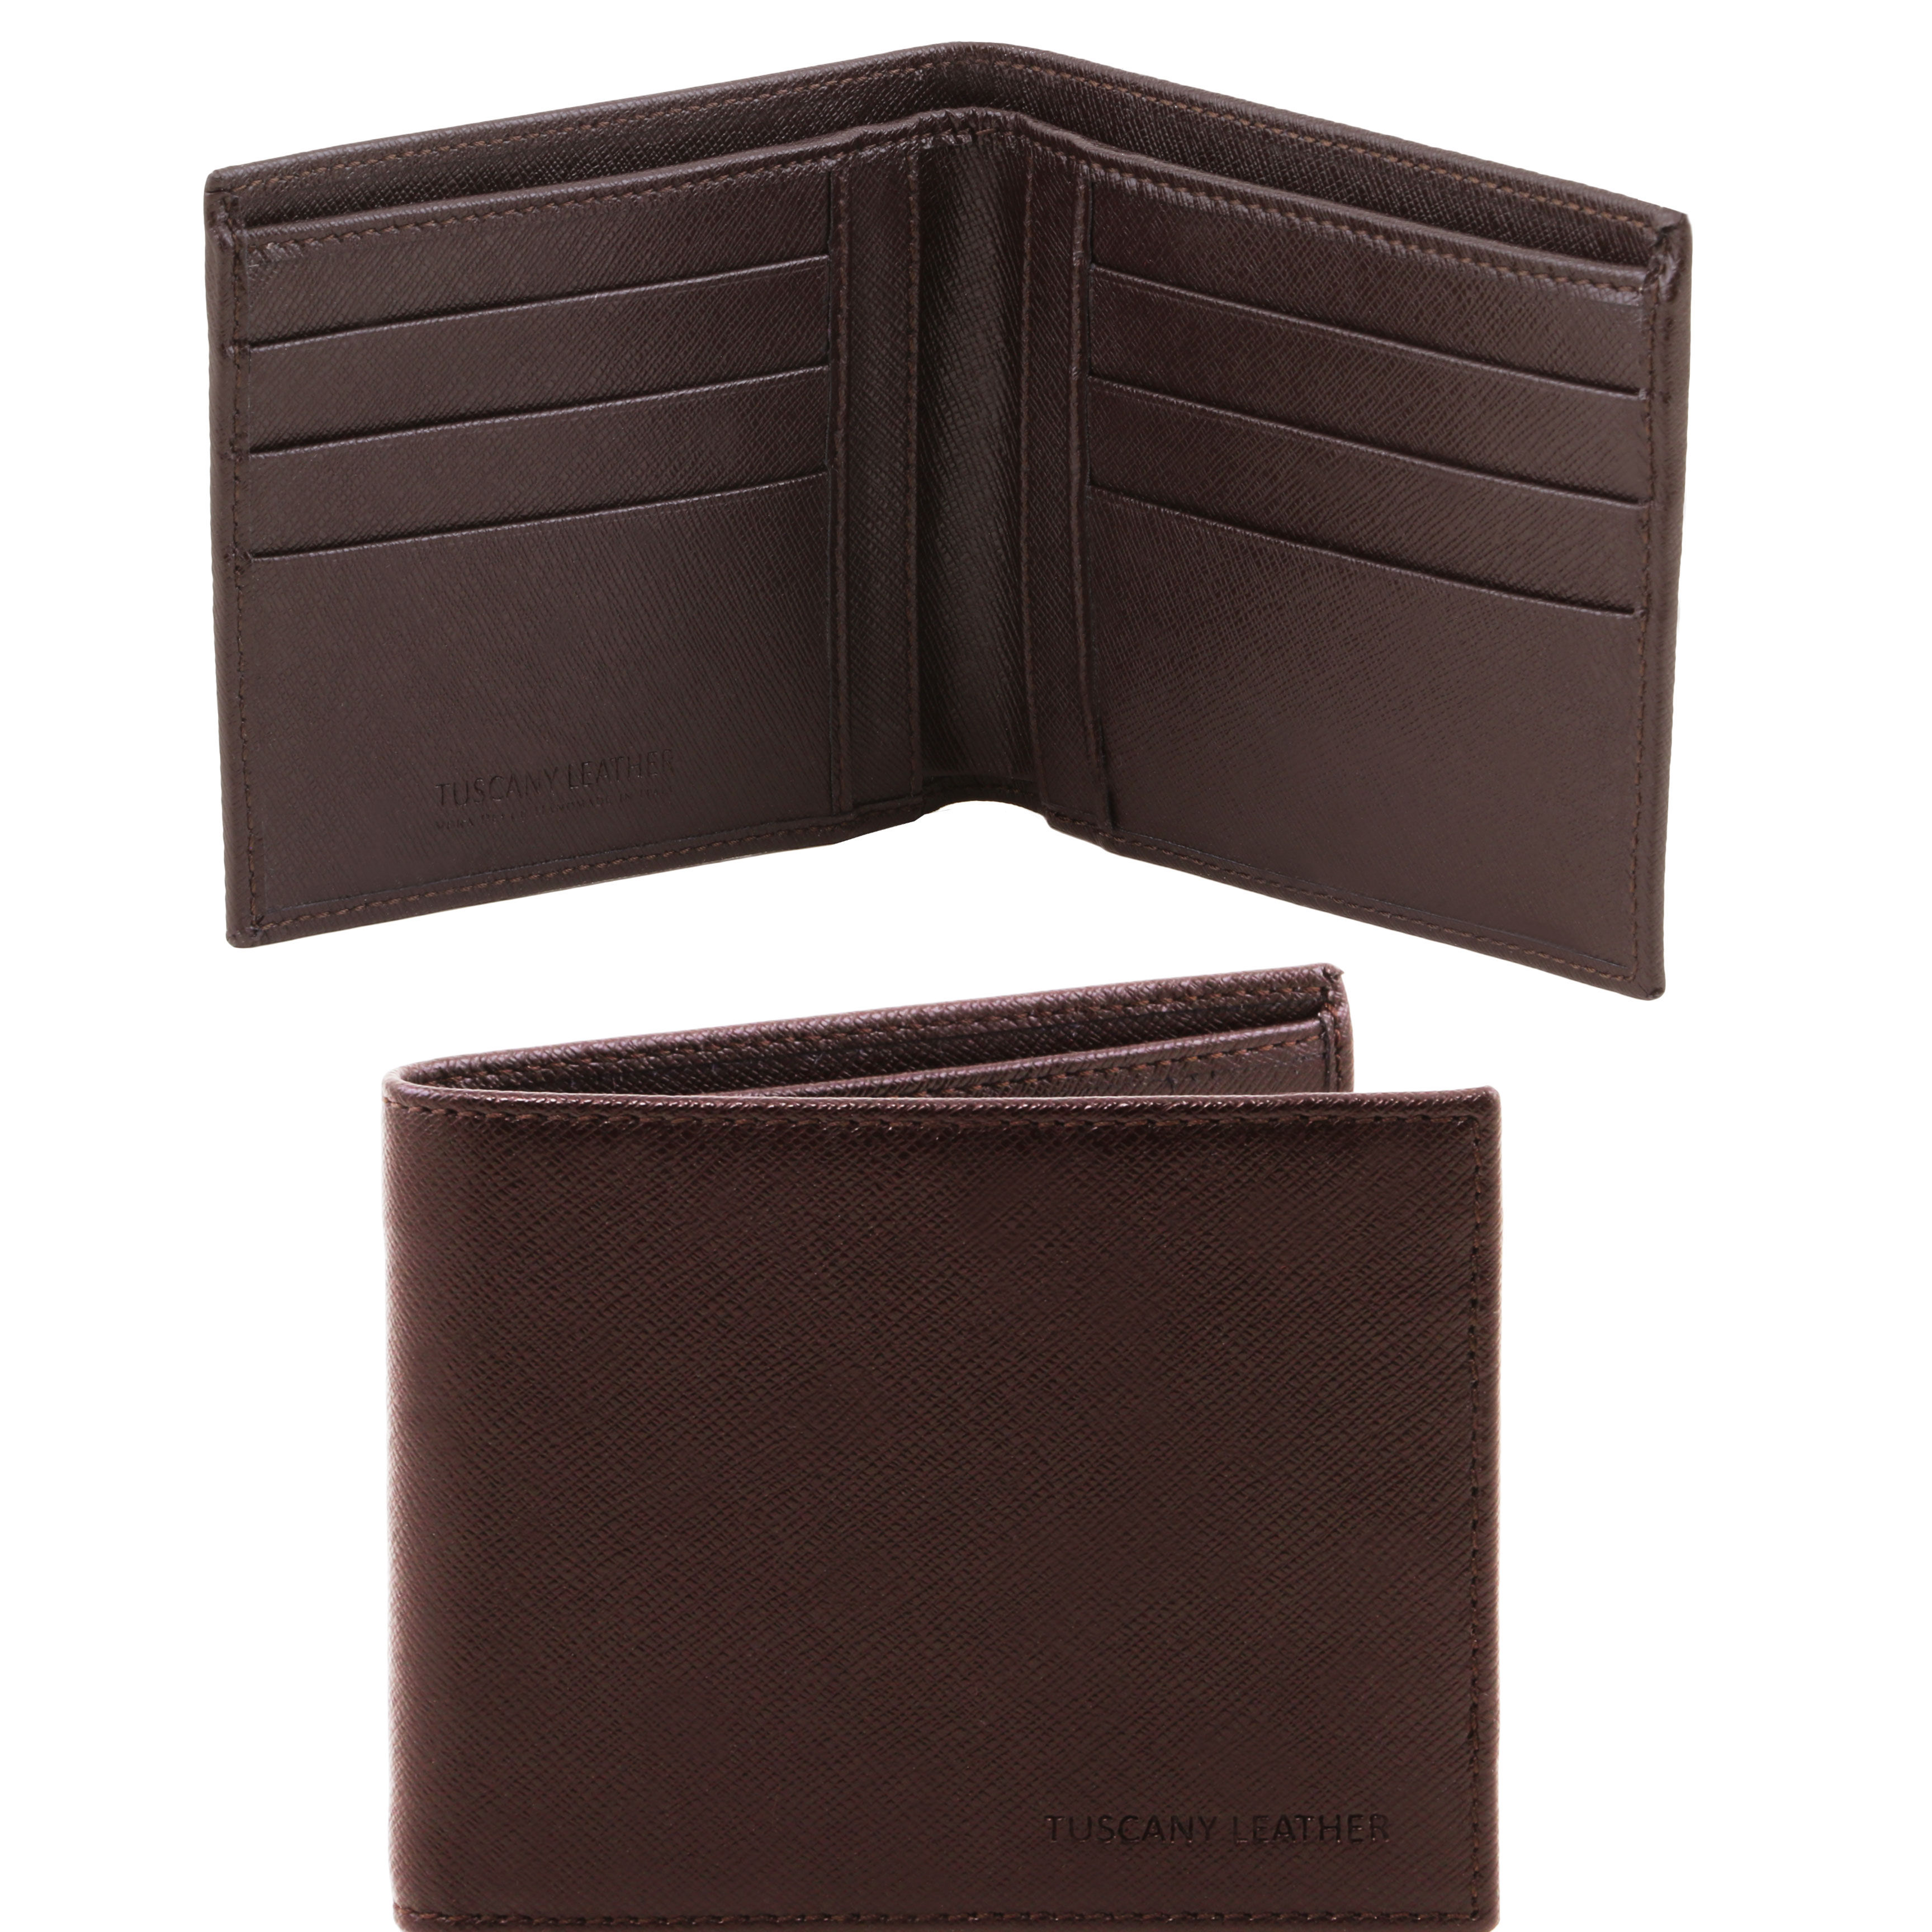 Exclusive 2 fold Saffiano leather wallet for men Dark Brown